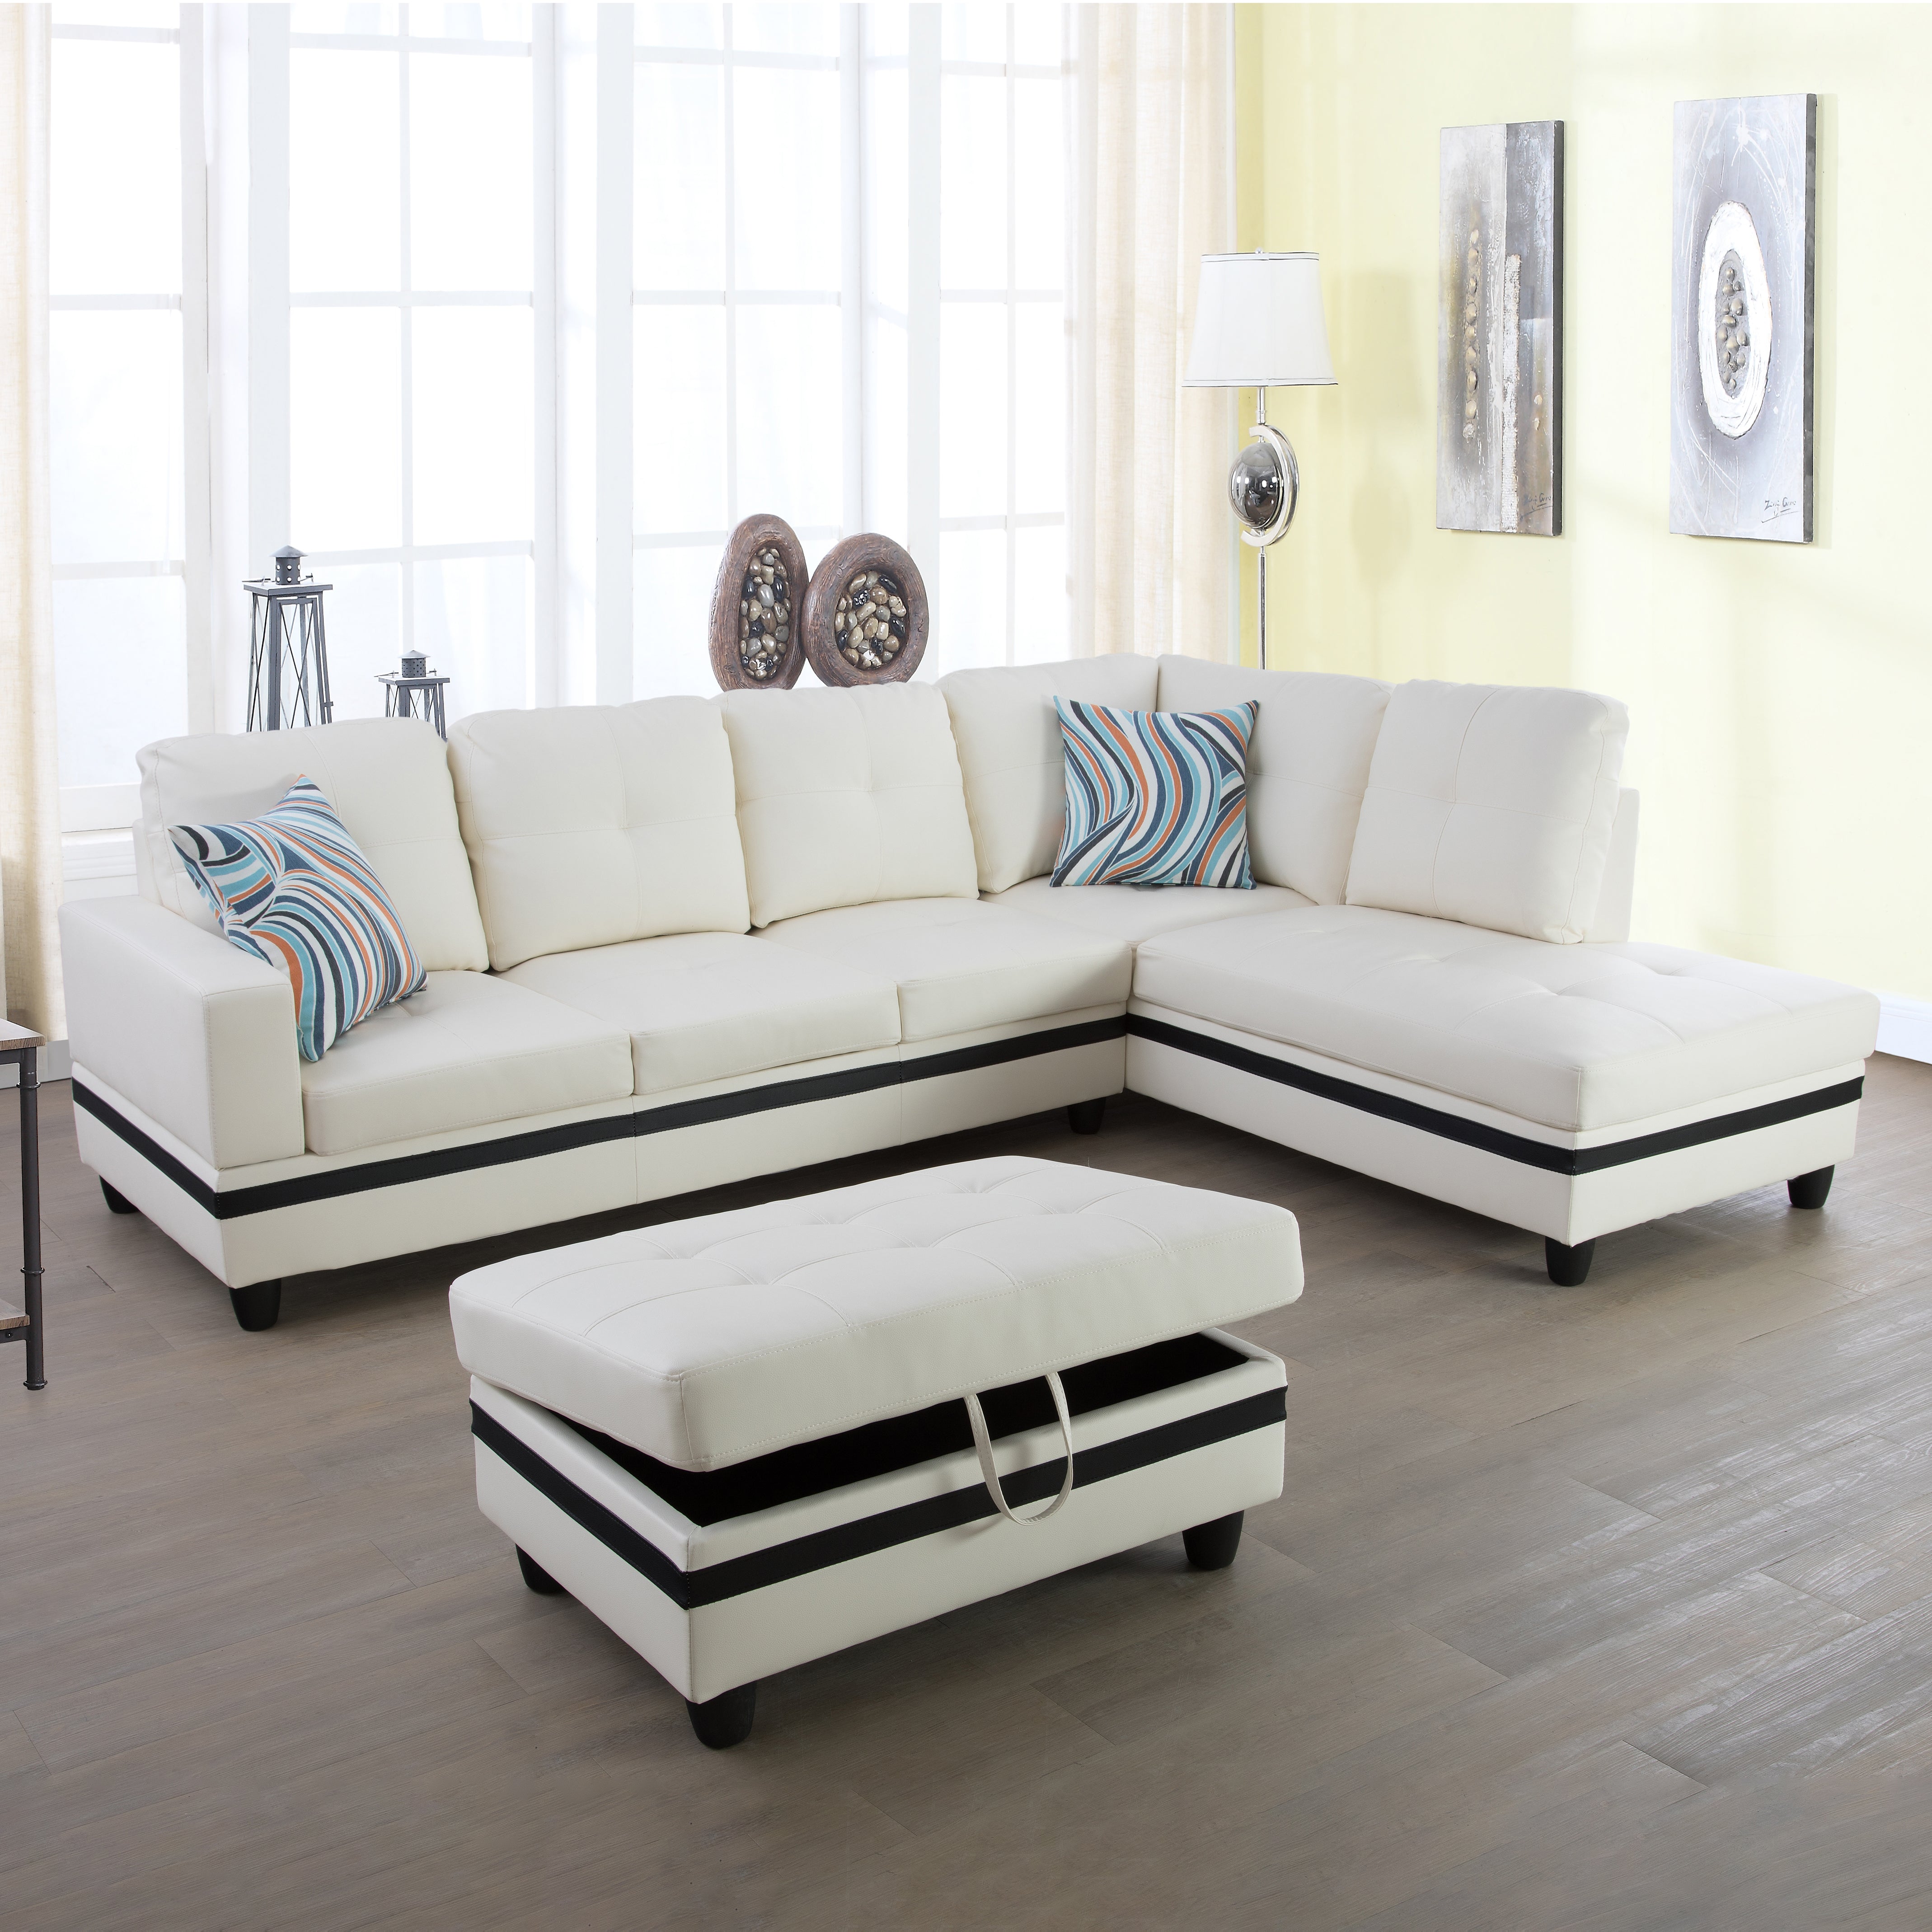 Ainehome White And Black Semi PU Synthetic Leather 3-Piece Couch Living Room Sofa Set